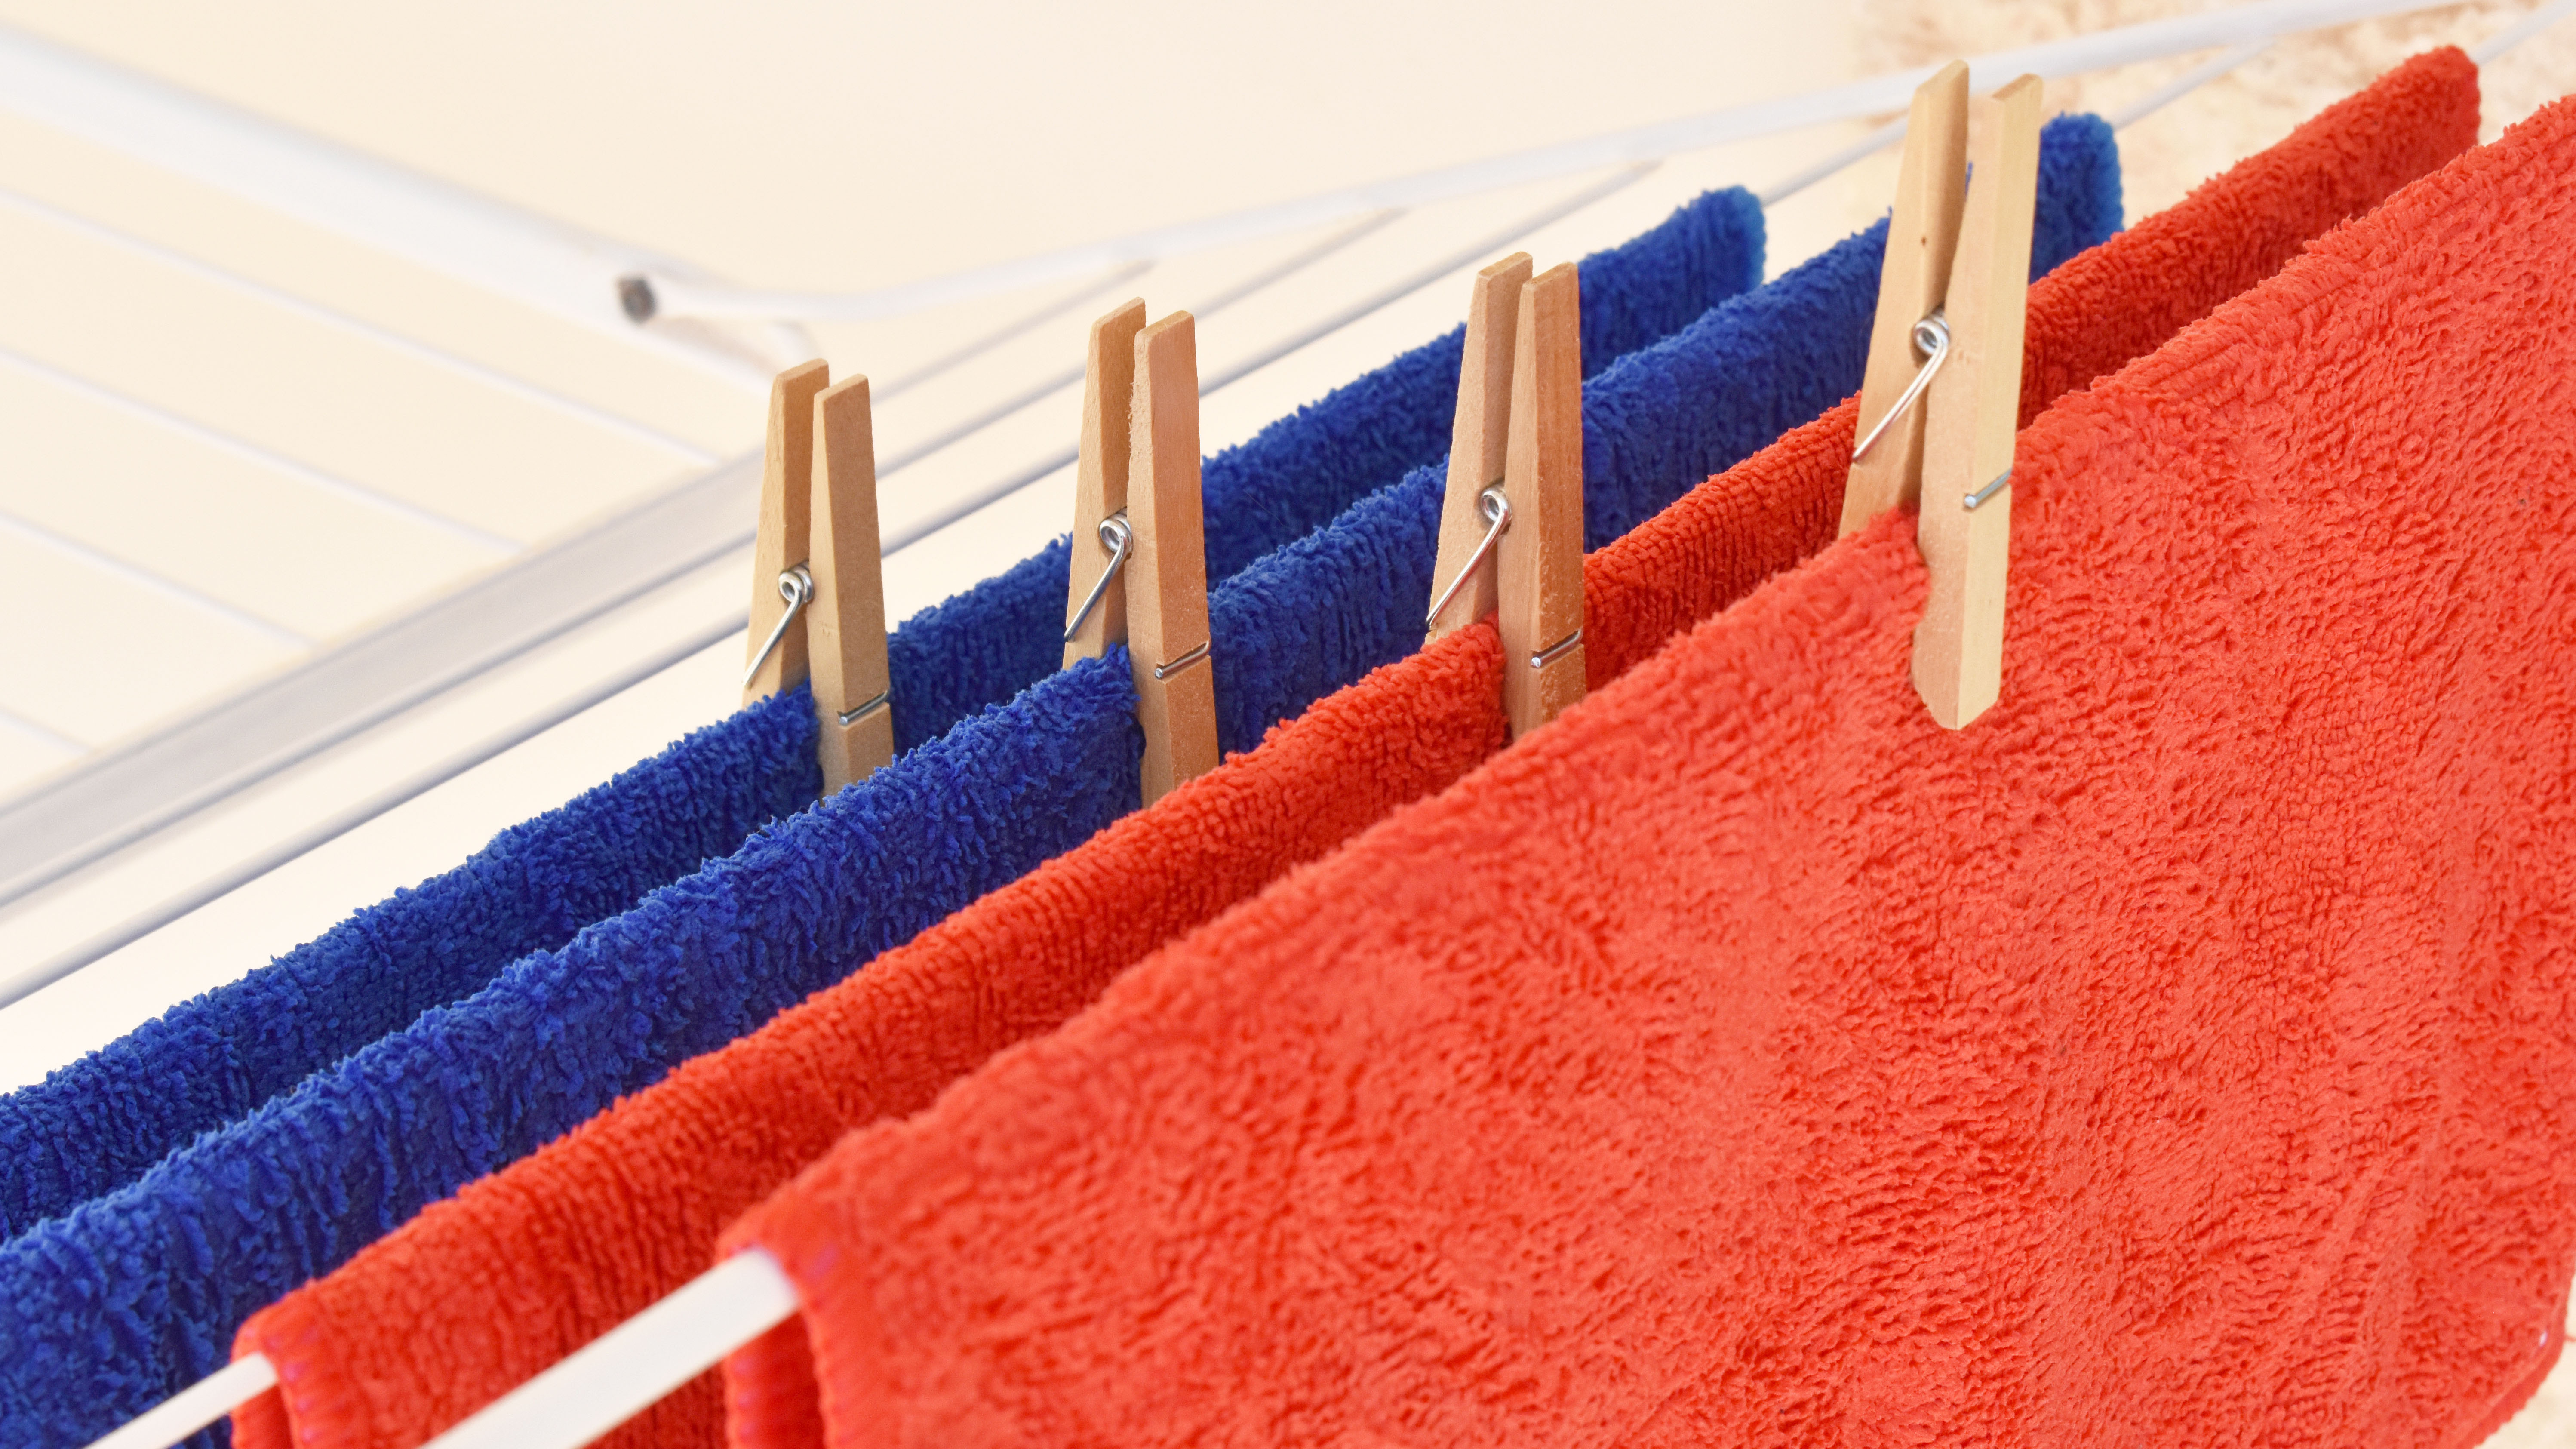 Red and blue microfiber cloths hanging to dry on a clothes line with pegs